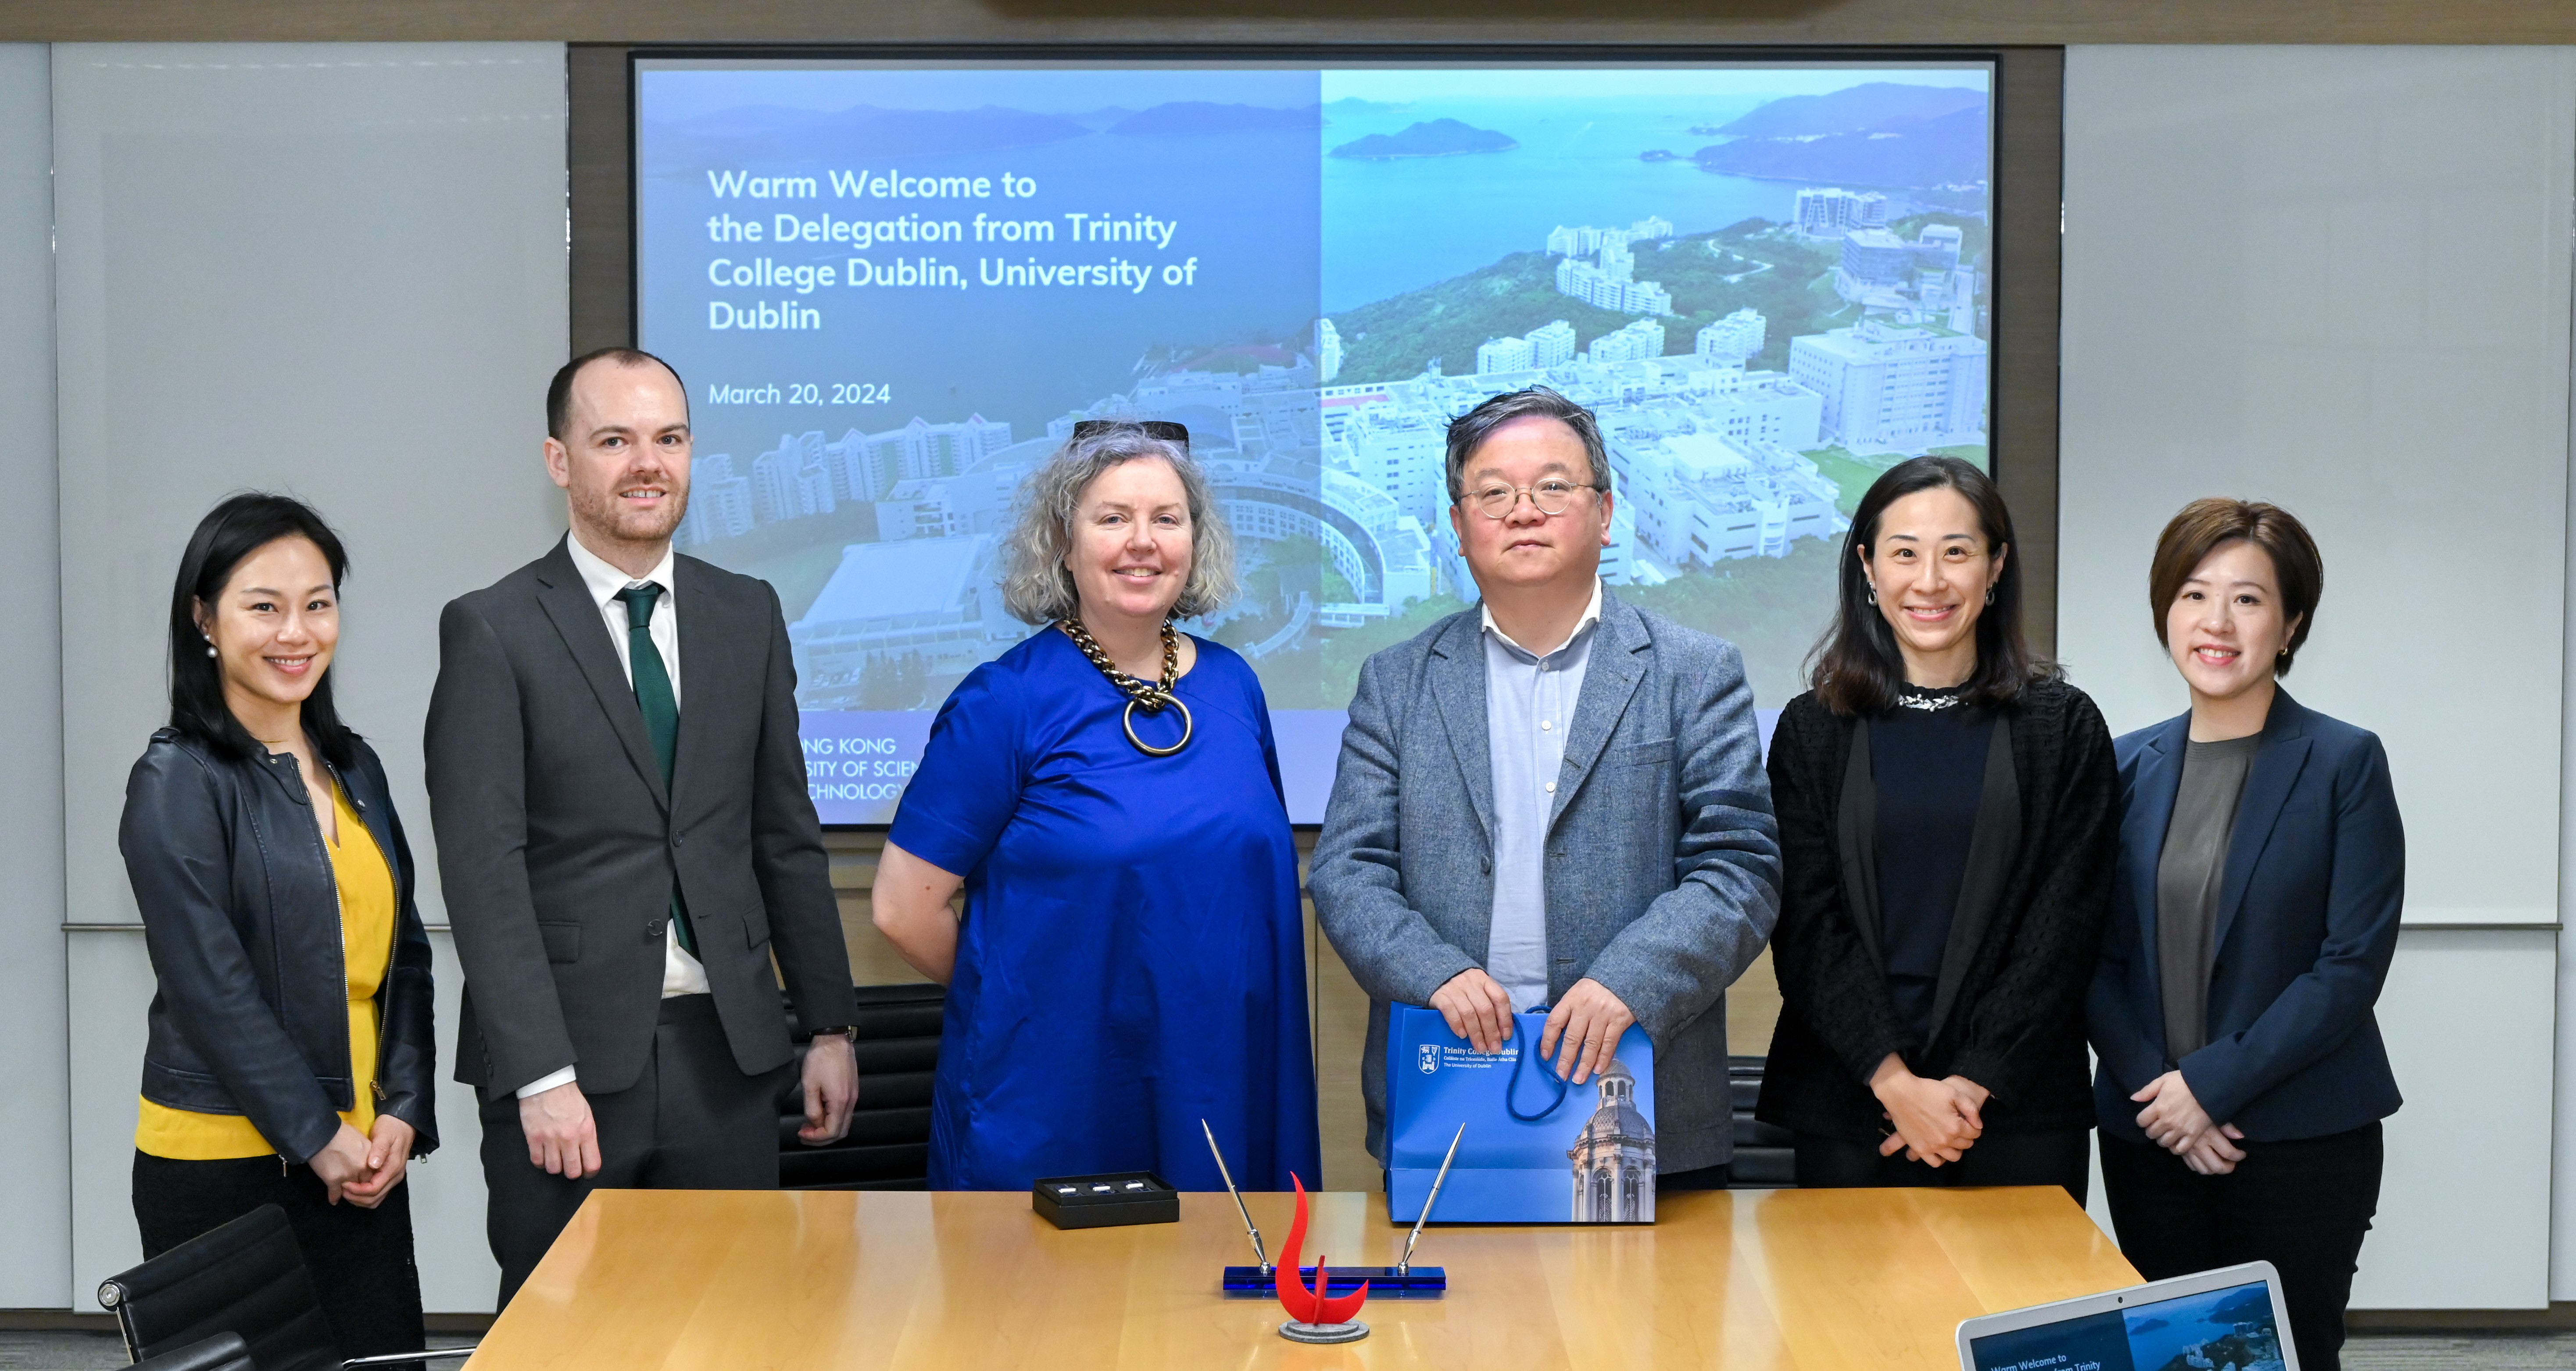 A group photo of Trinity College Dublin delegation and HKUST team.